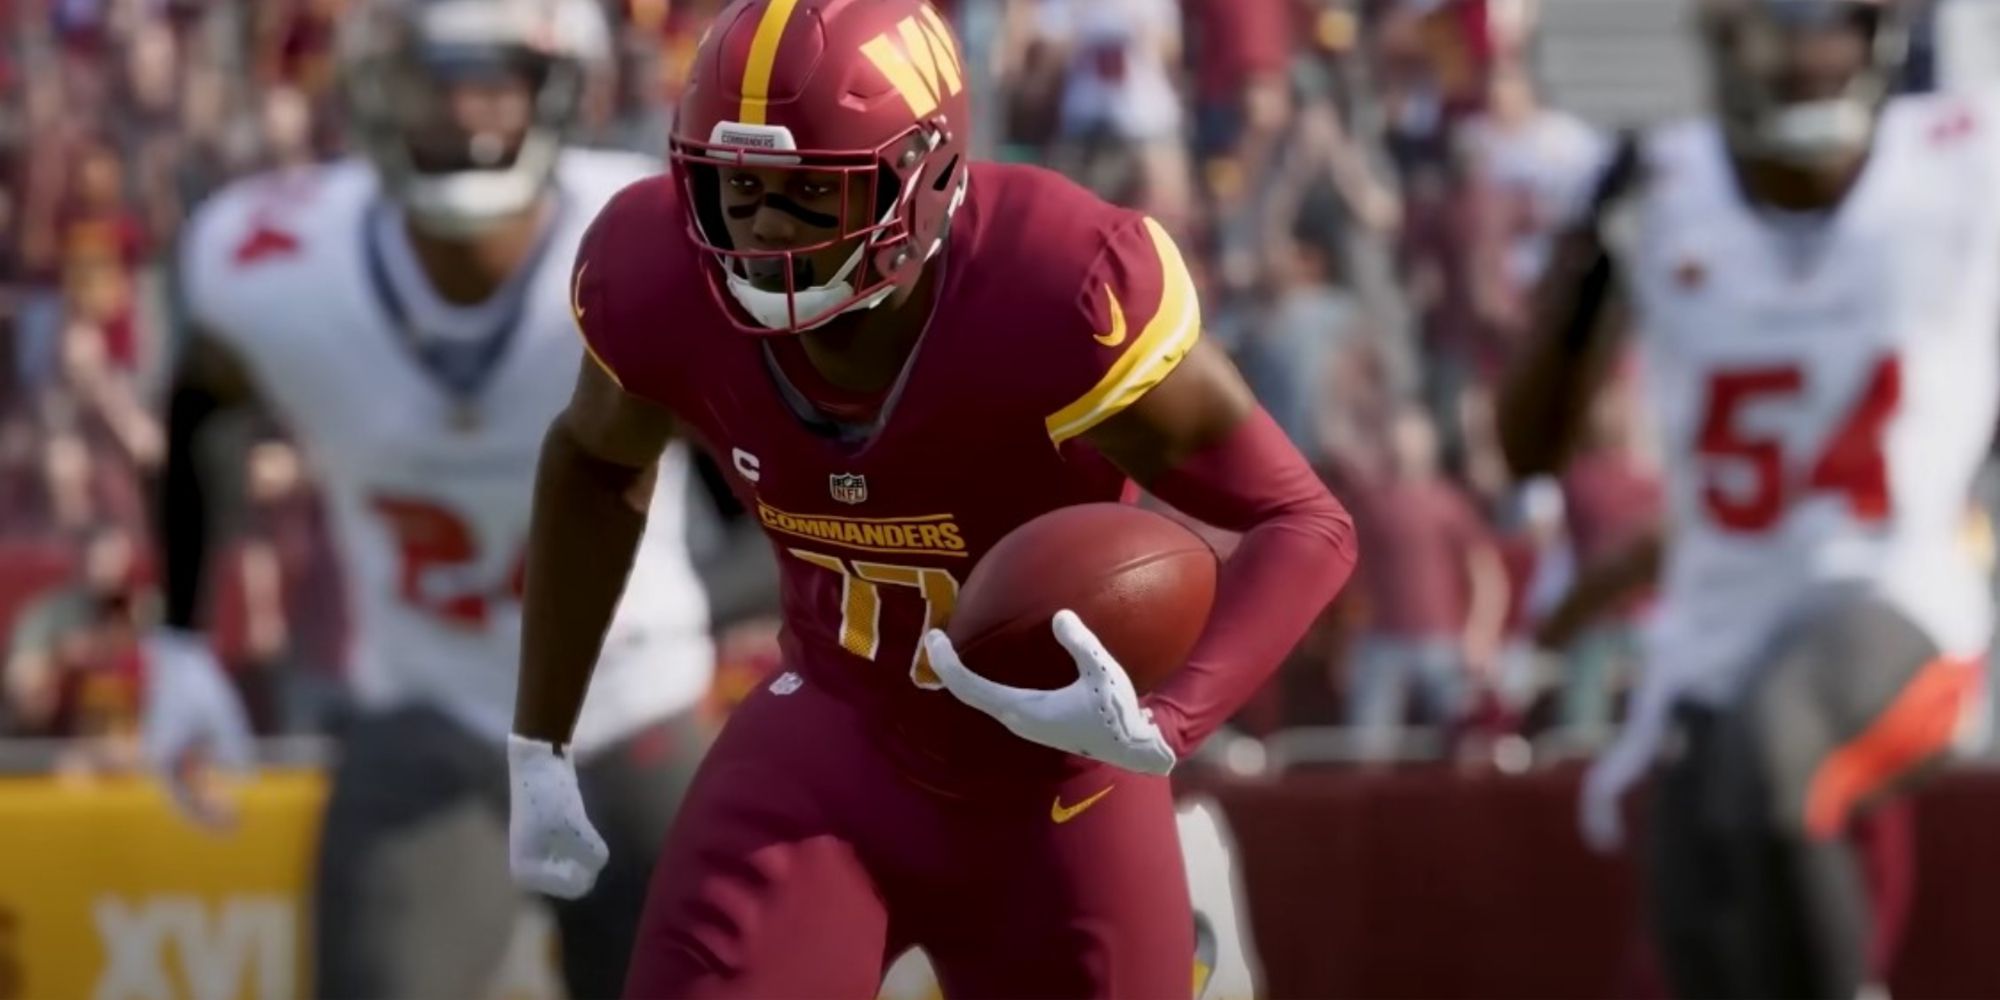 Madden NFL 23 Catch a run with the commanders